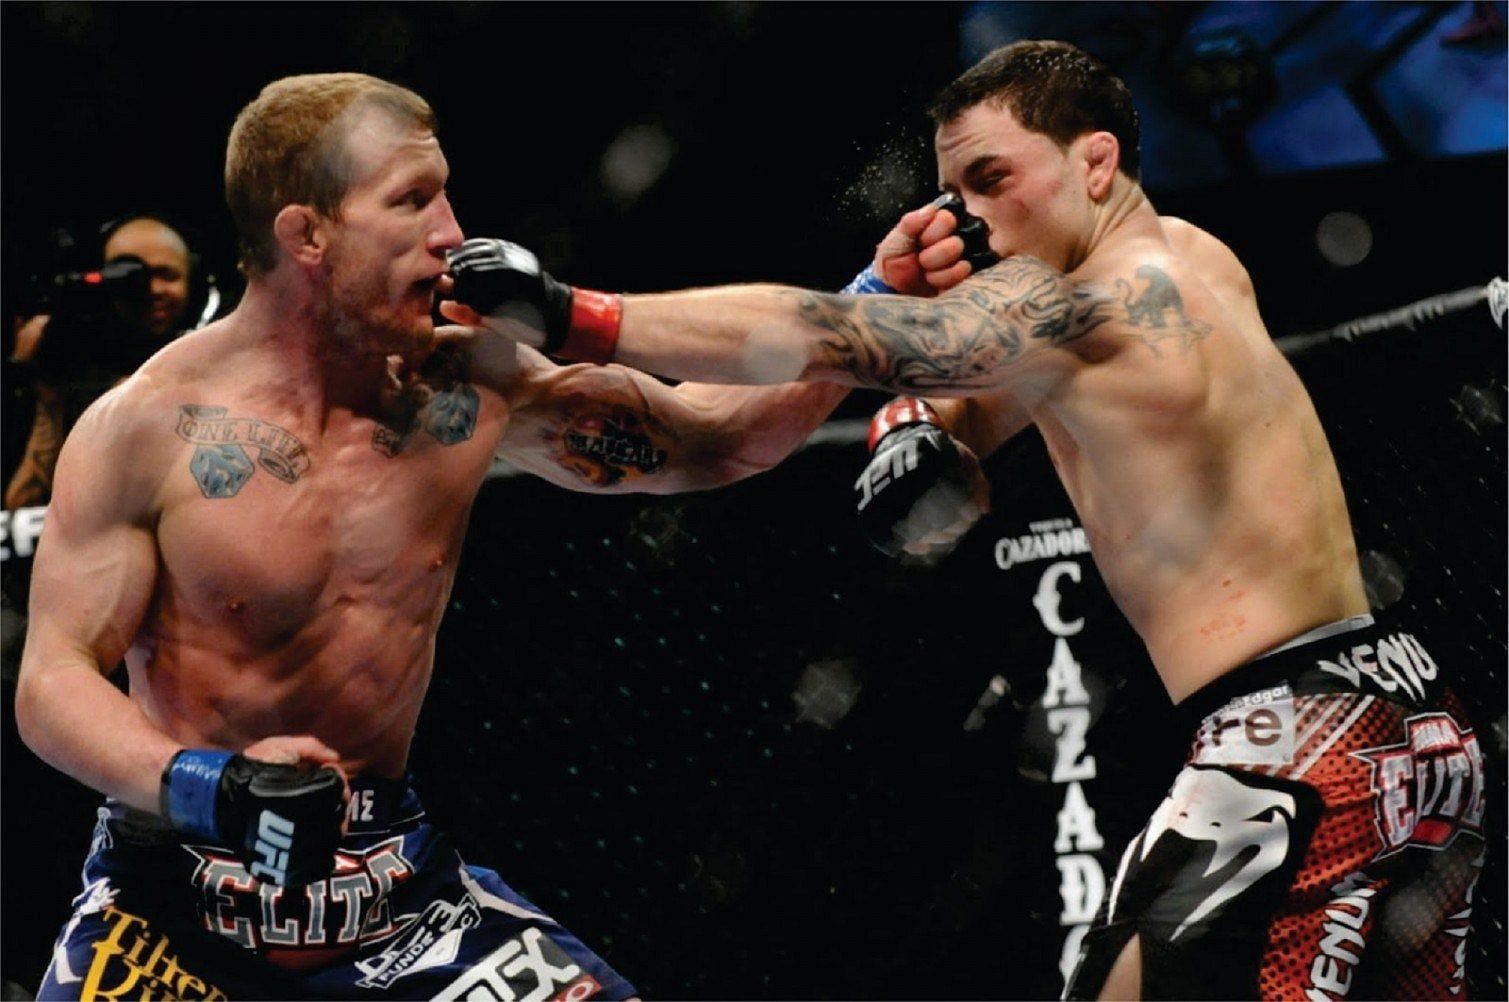 Frankie Edgar and Gray Maynard started 2011 with an unforgettable bang